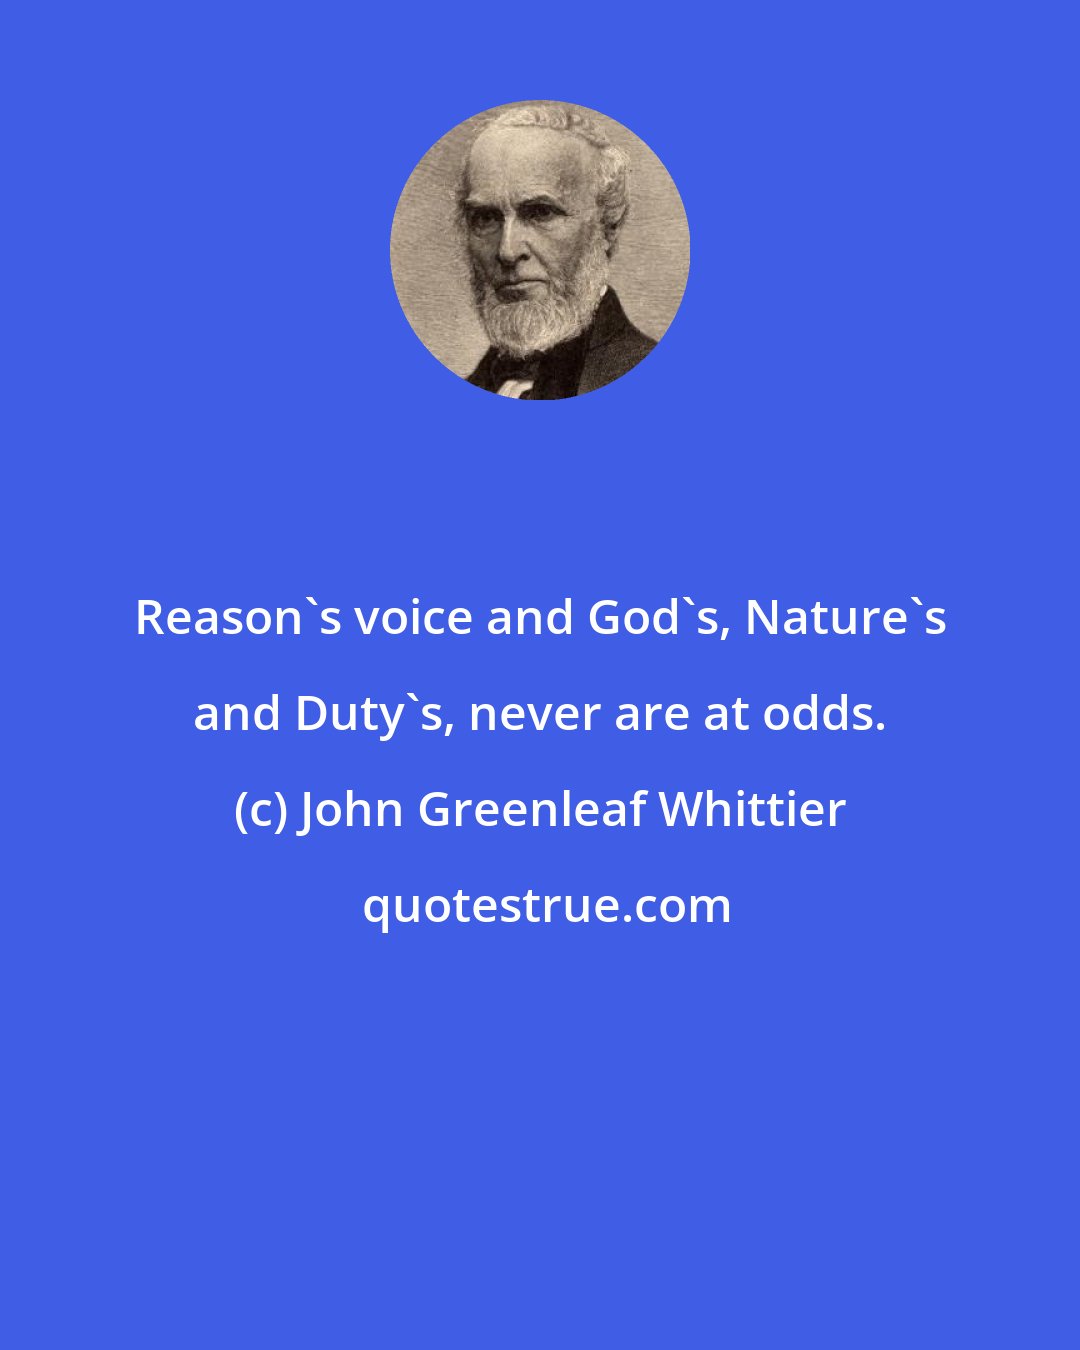 John Greenleaf Whittier: Reason's voice and God's, Nature's and Duty's, never are at odds.